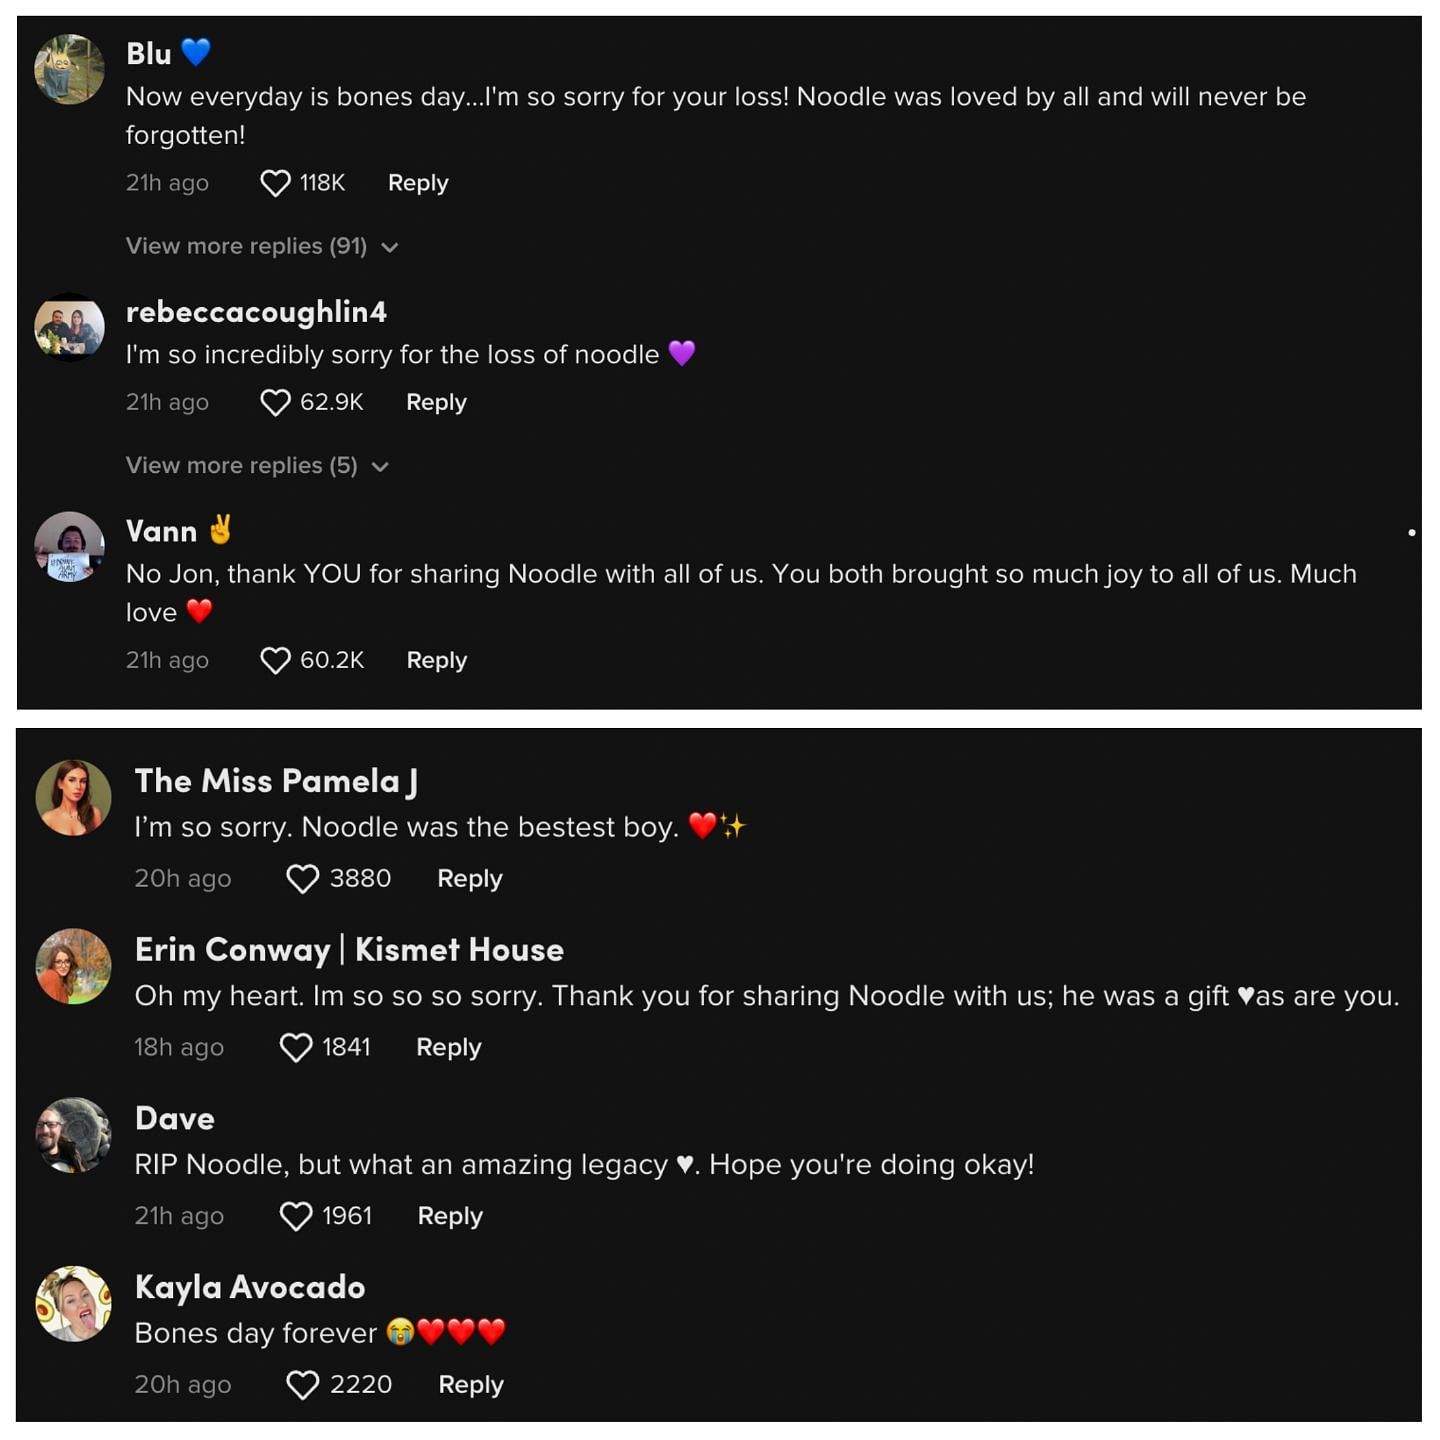 Sad fans comment below the video shared by the pug's owner. Fans reactions explored. (Image via TikTok)